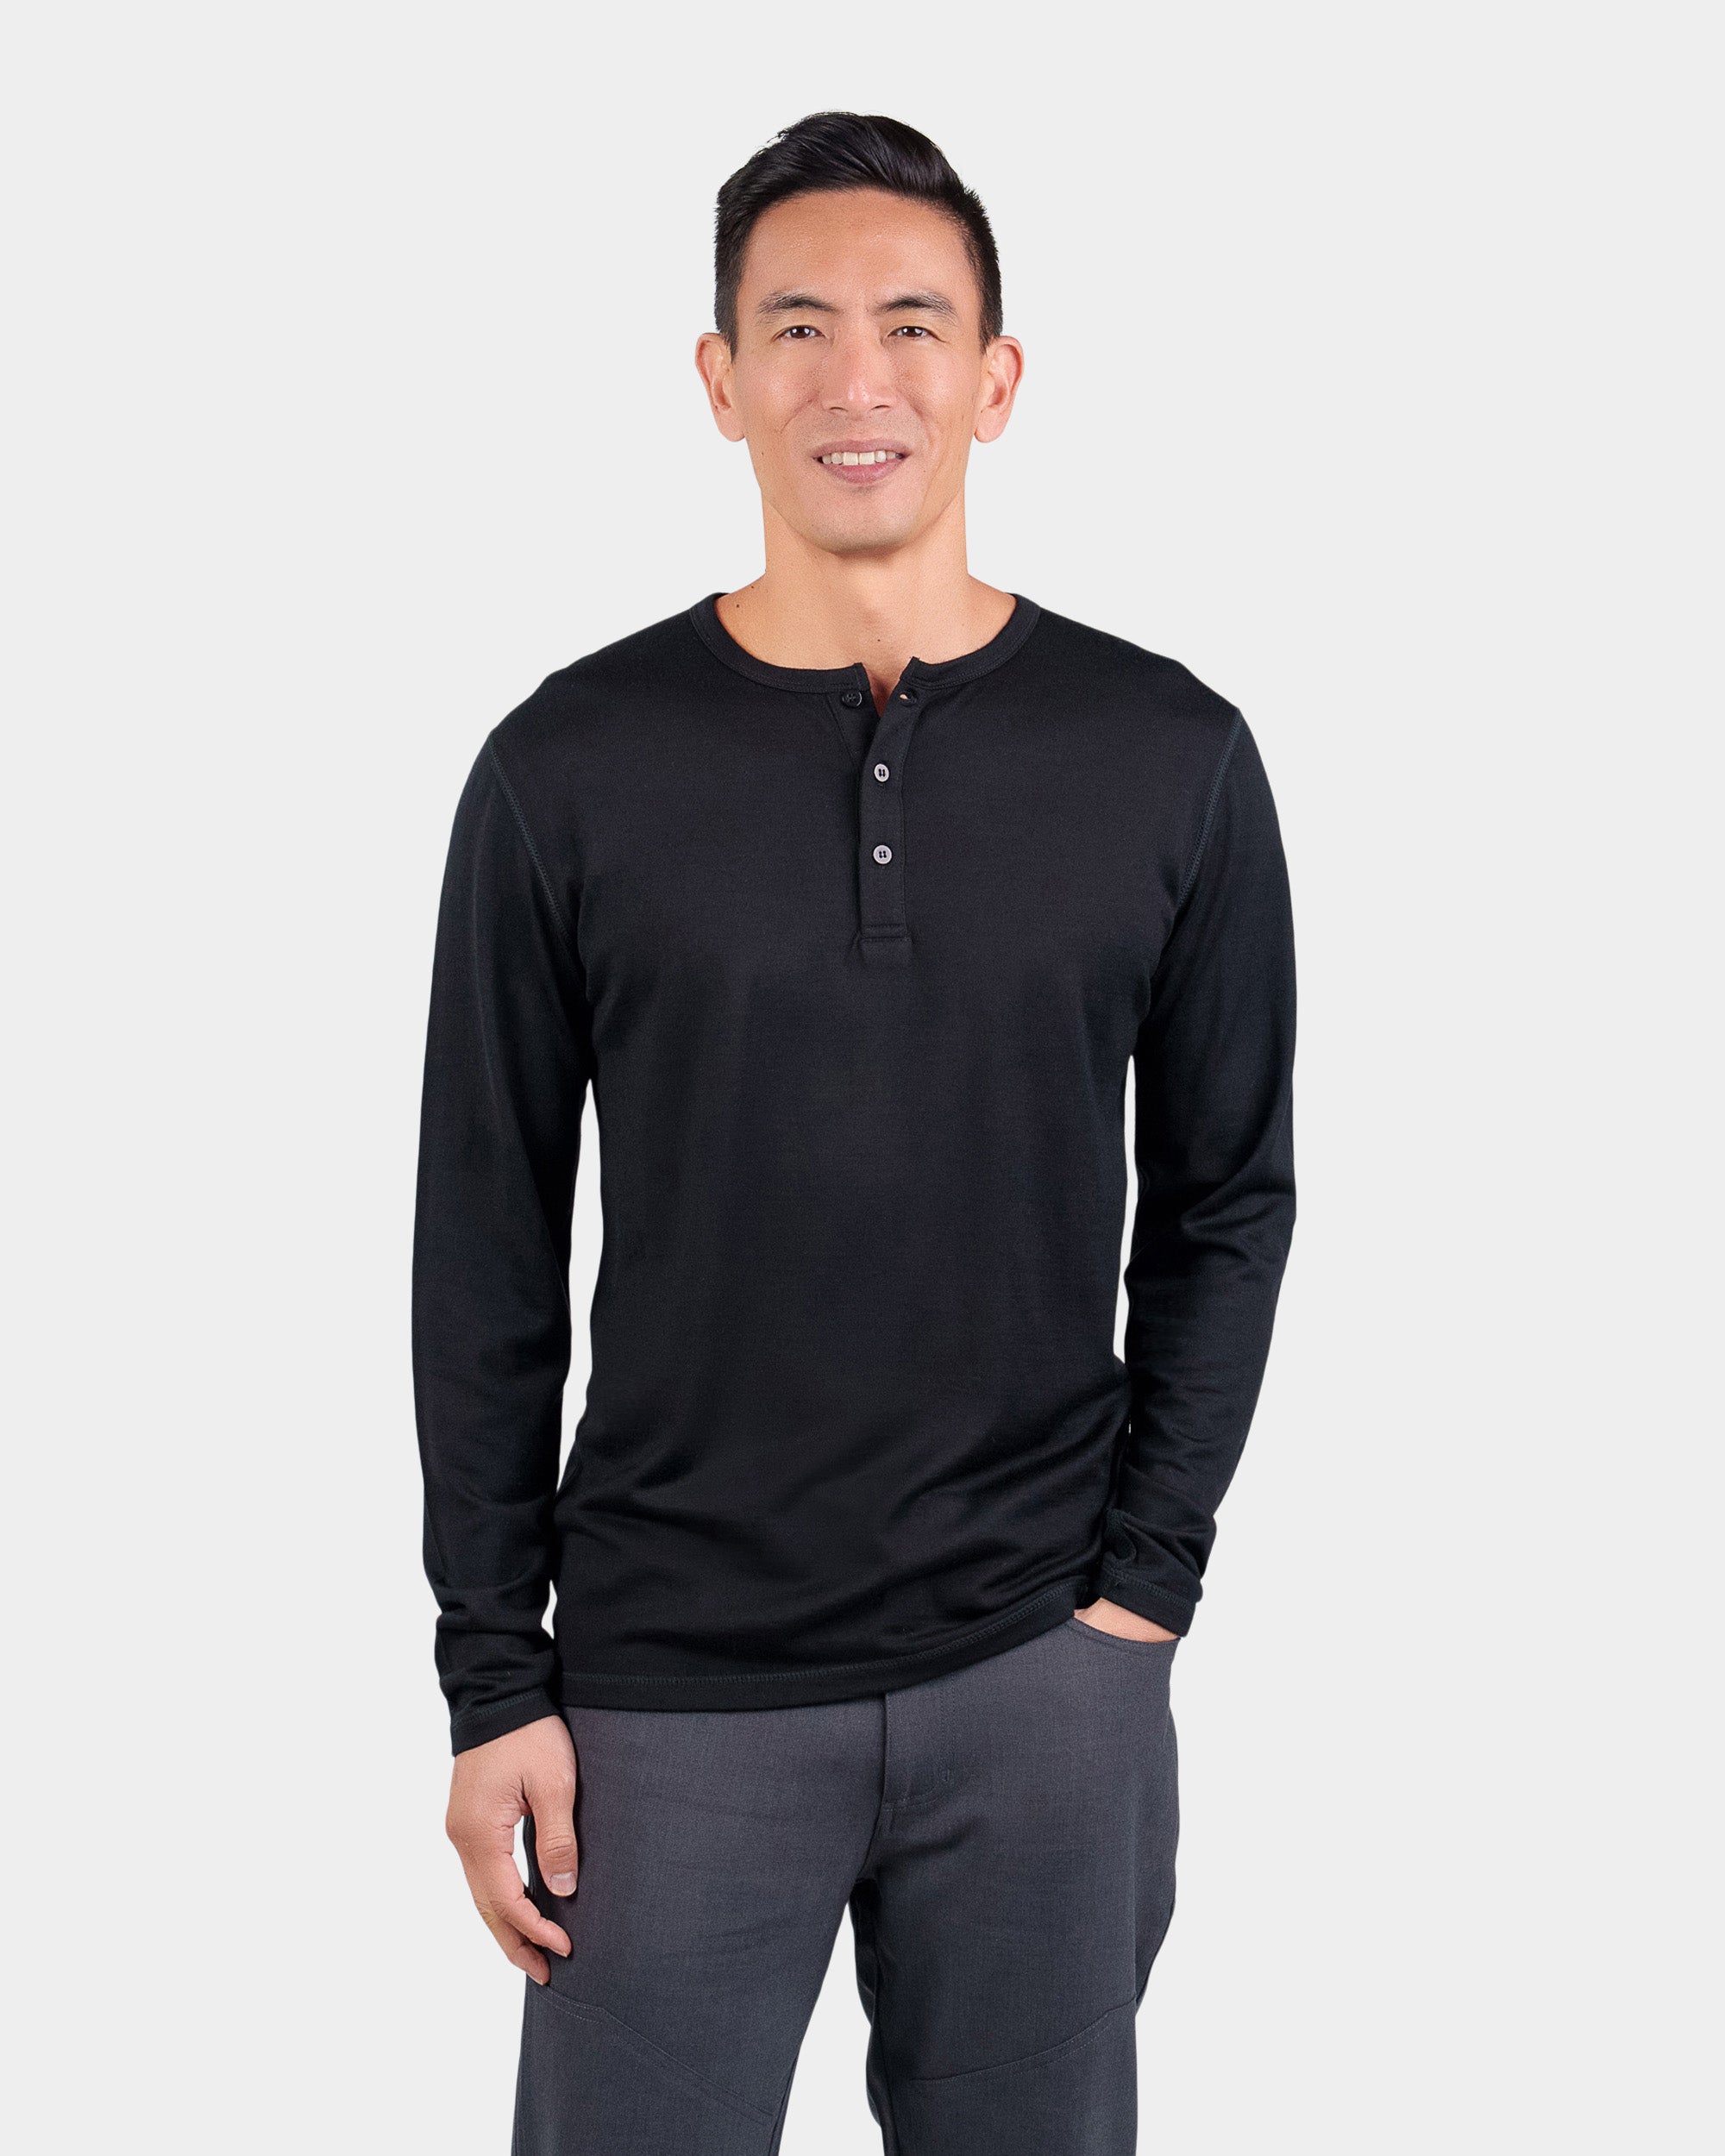 Woolly Clothing Co. Men's Henley